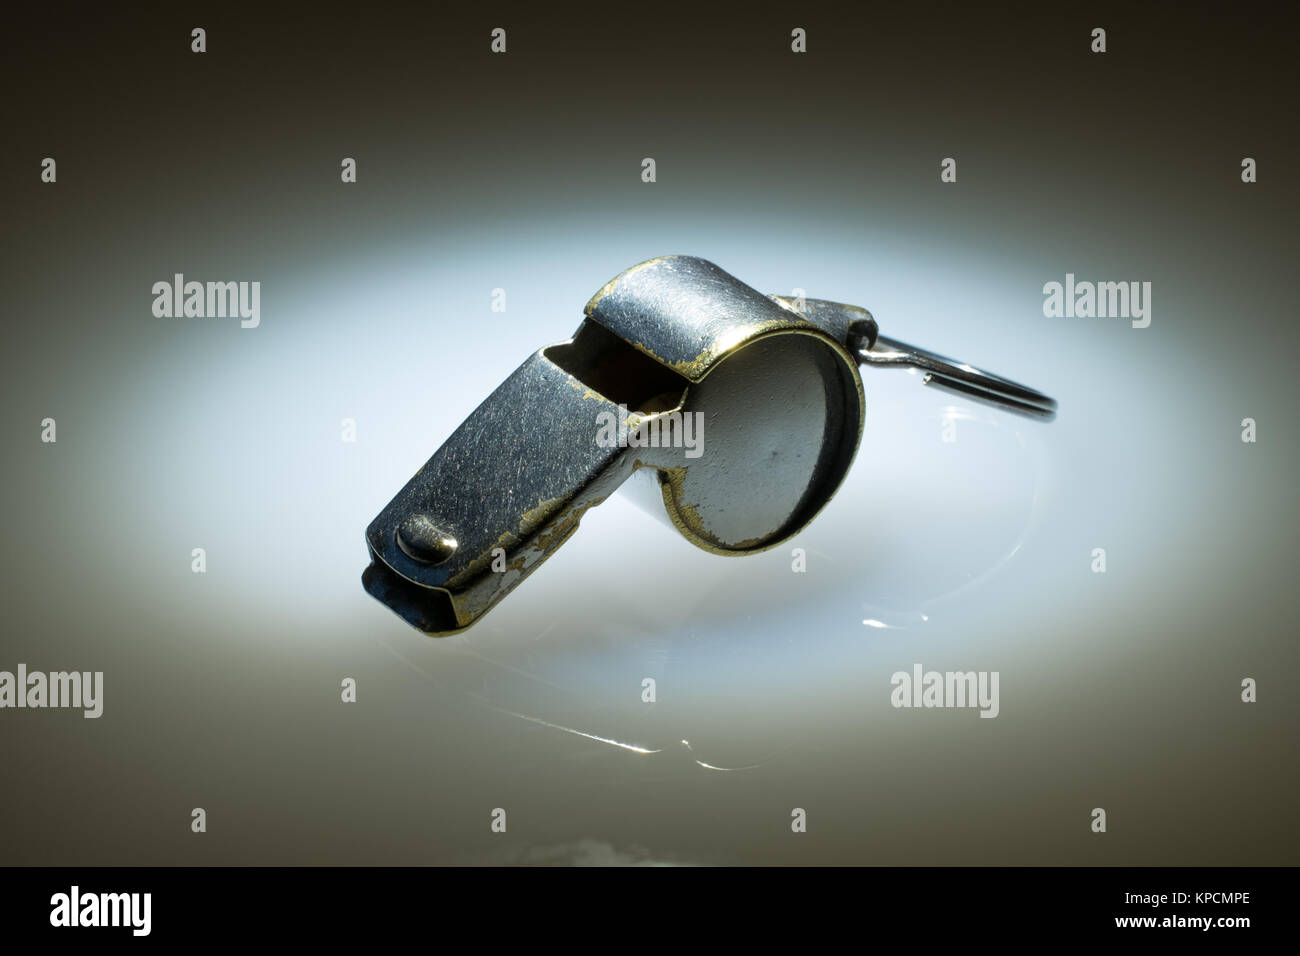 Worn and marked sports whistle made of plated brass. Used by referees, coaches and other officials. Stock Photo